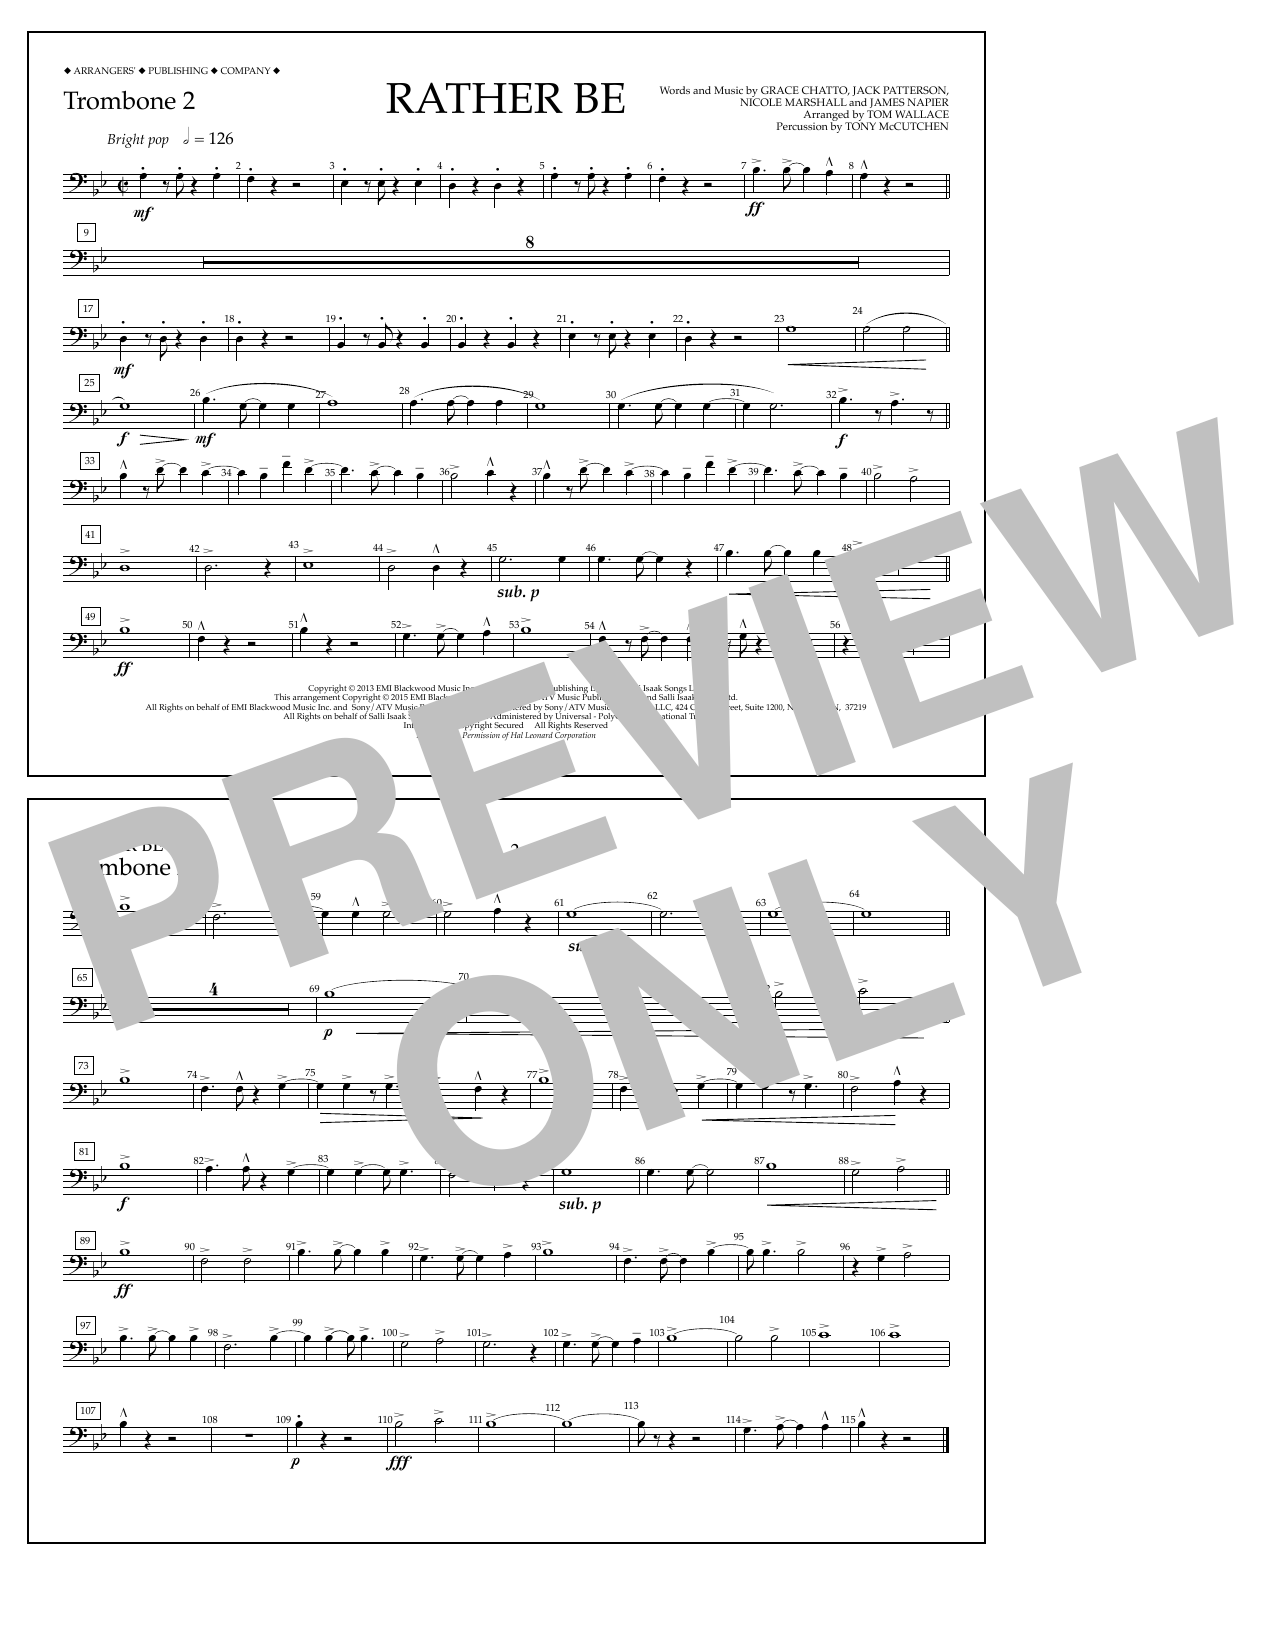 Download Tom Wallace Rather Be - Trombone 2 Sheet Music